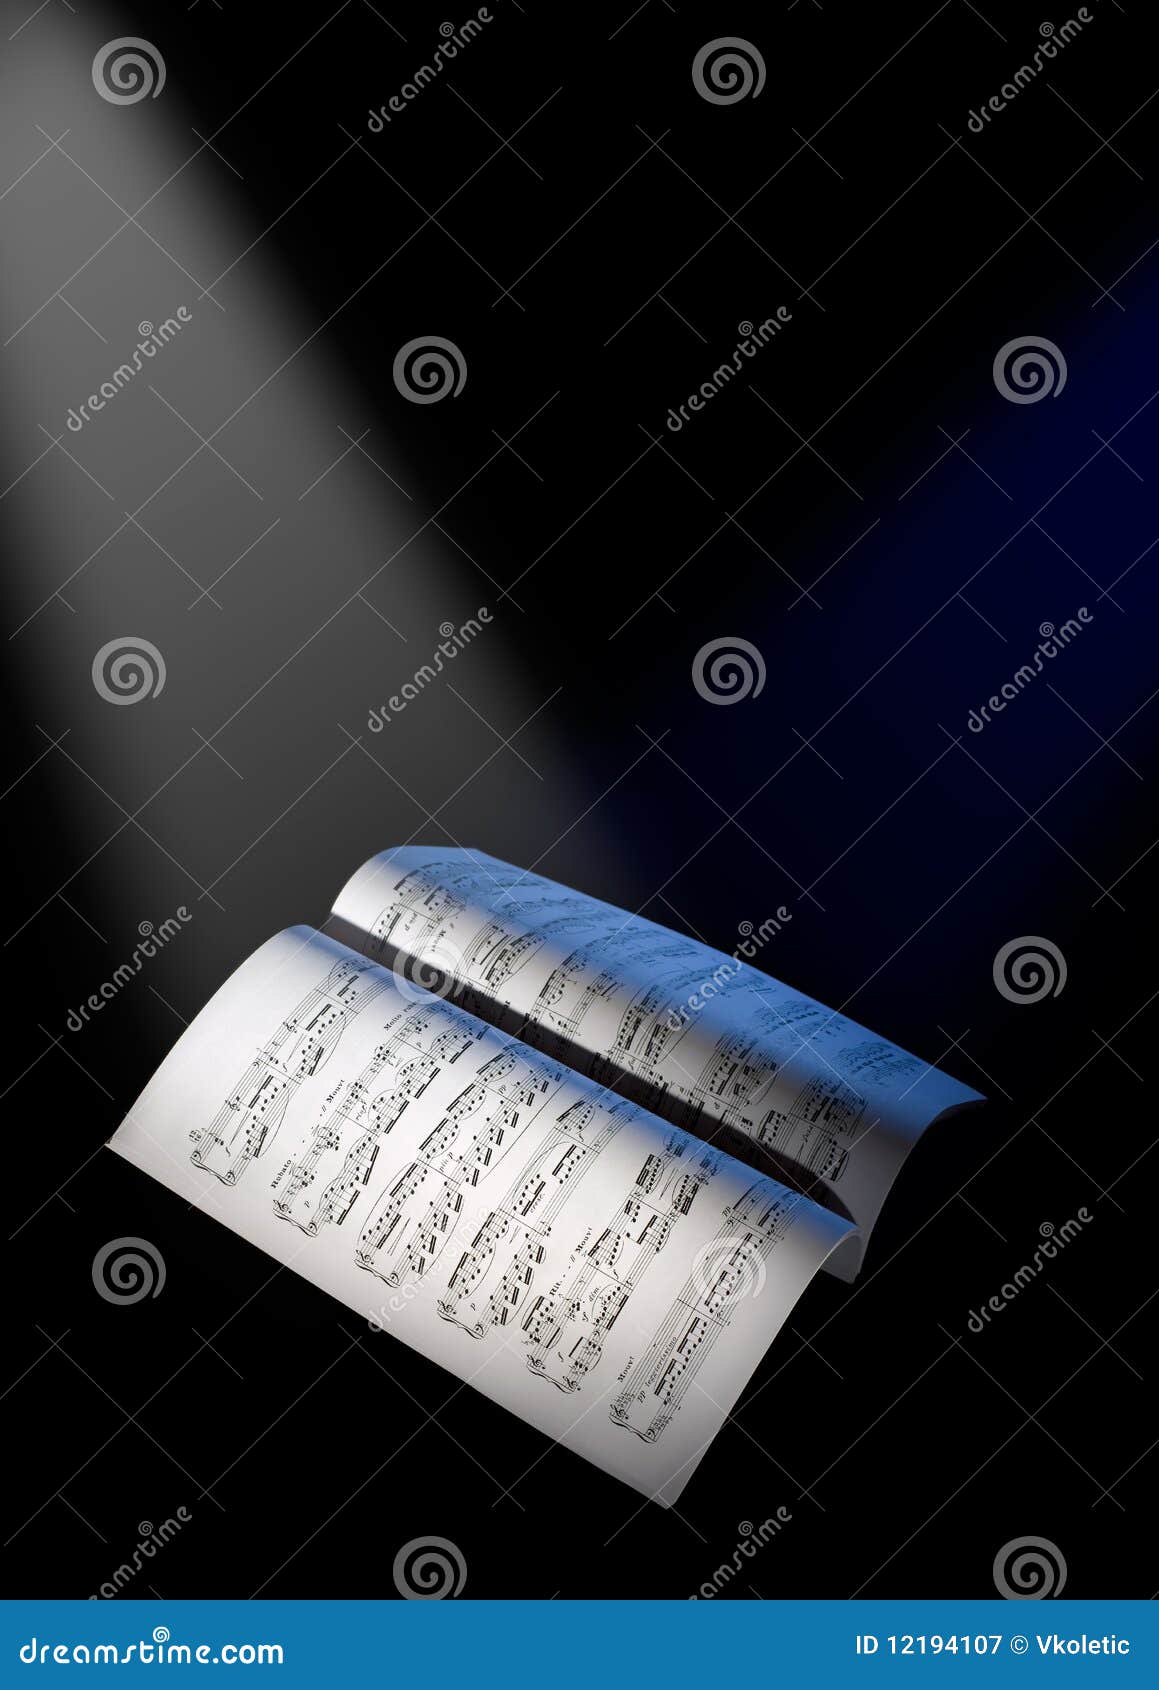 music sheets under the reflector lights